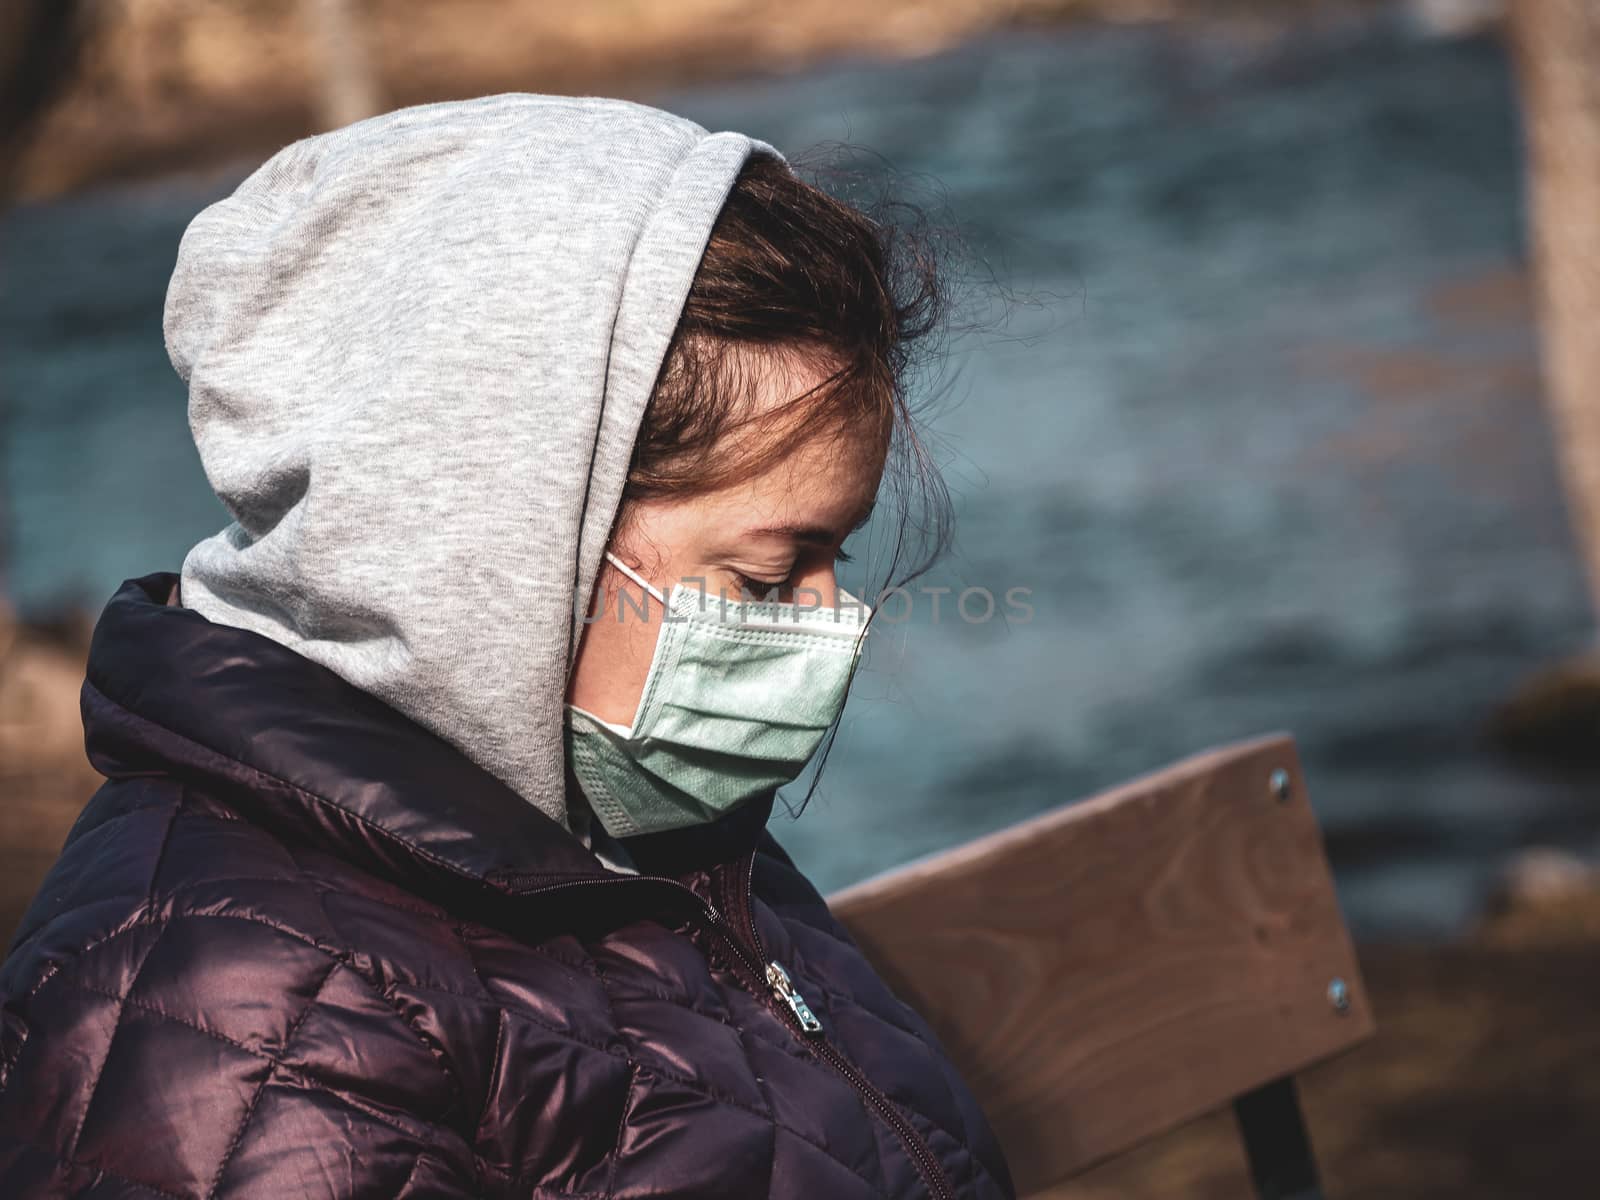 Lady and coronavirus protection. Sad Woman sitting alone on bench in park wearing mask to avoid infectious. Corona virus, or Covid 19, is spreading all over the world. Receives bad news on her phone.